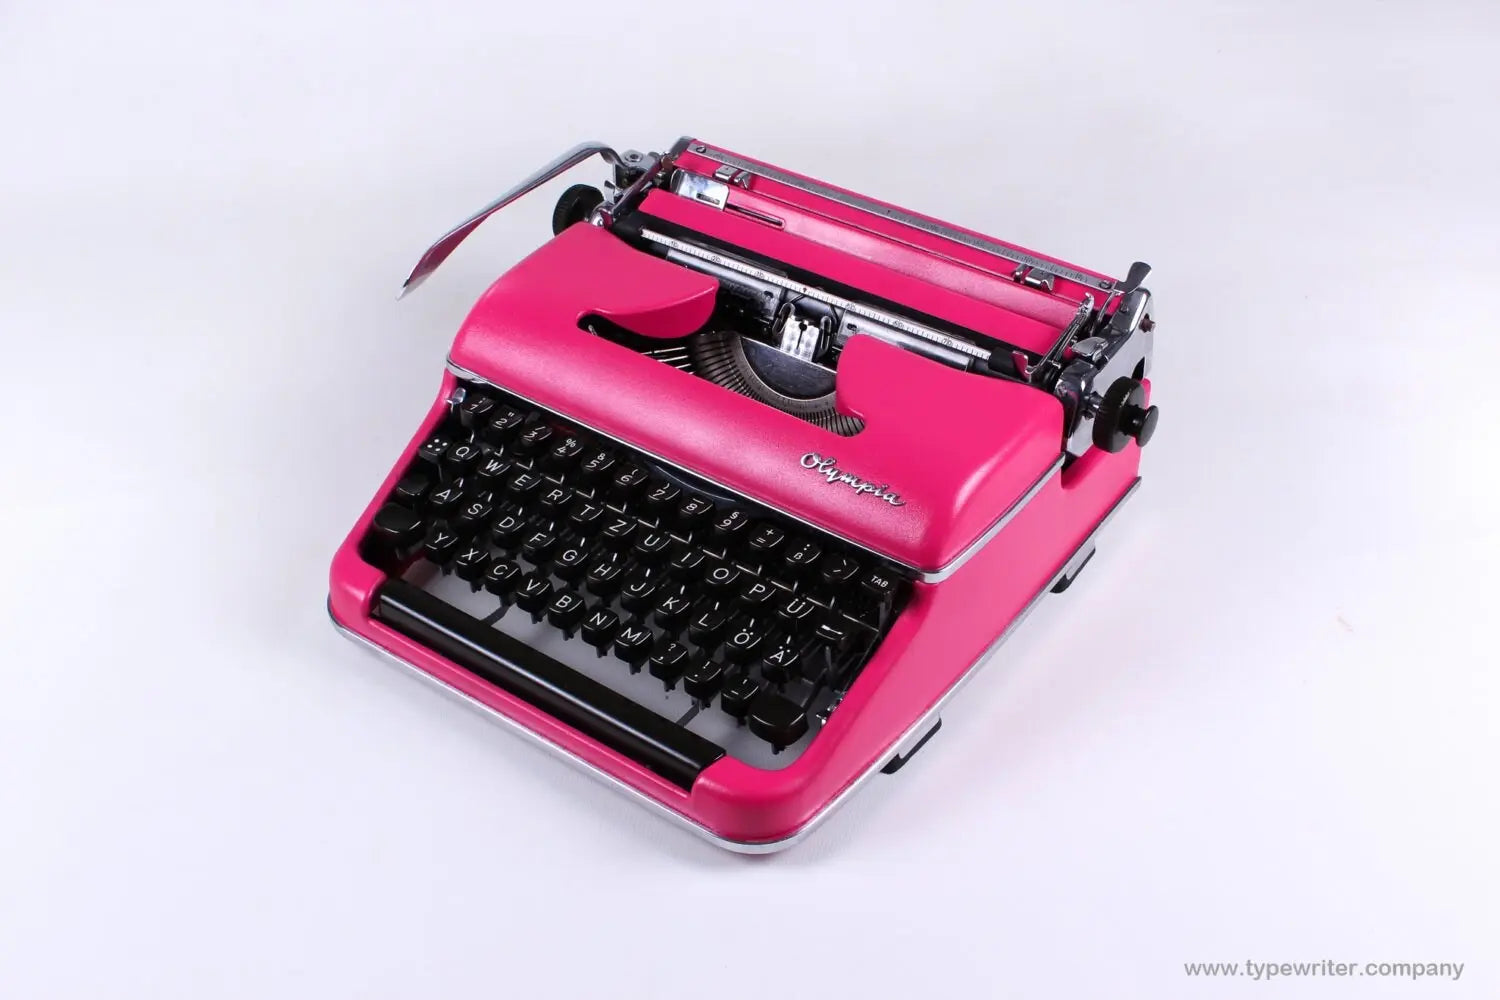 SALE! - Olympia SM3 Pink Typewriter, Vintage, Mint Condition, Professionally Serviced - ElGranero Typewriter.Company